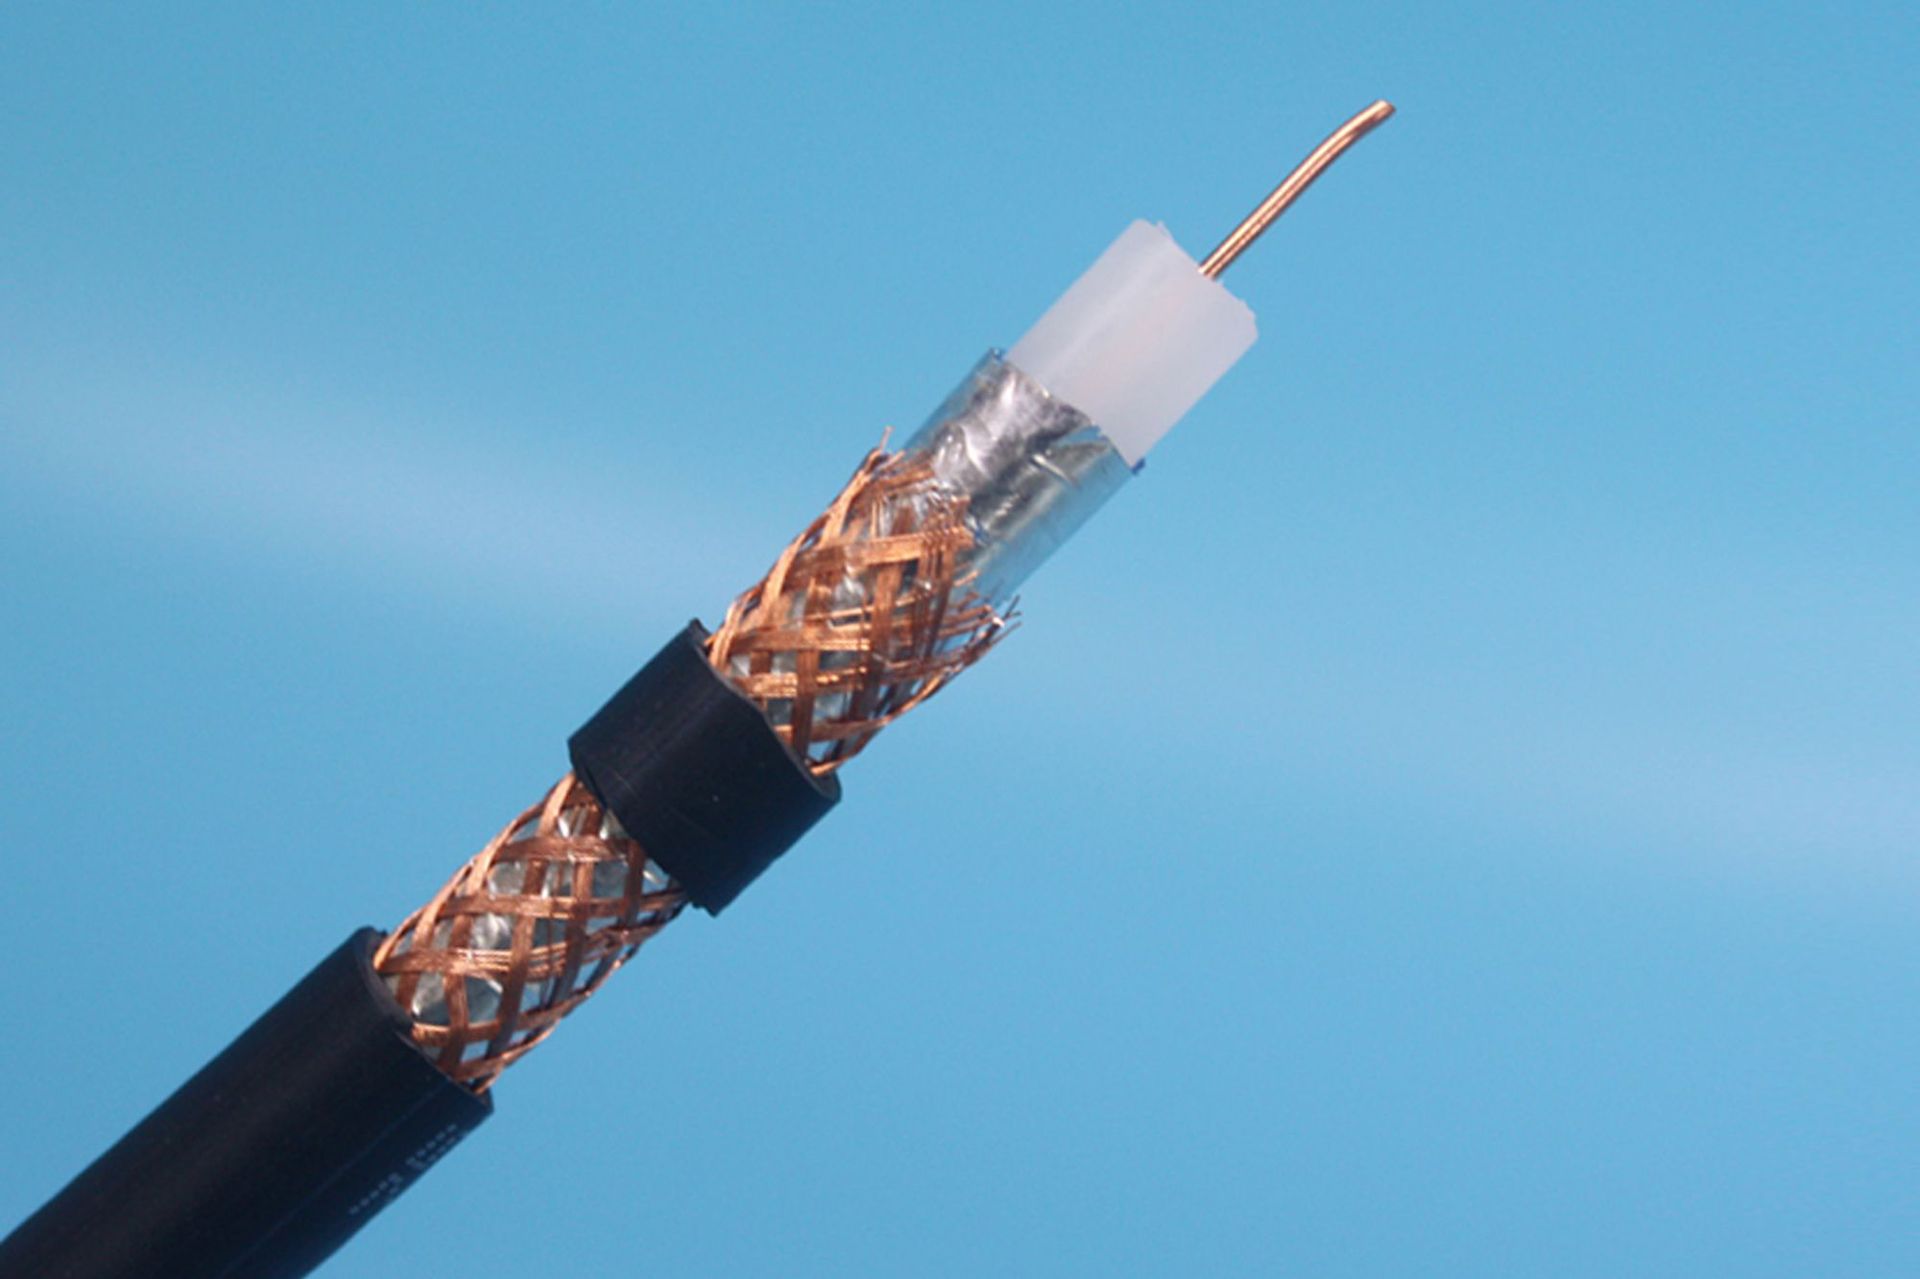 The diagram shows the most common types of coaxial cables.